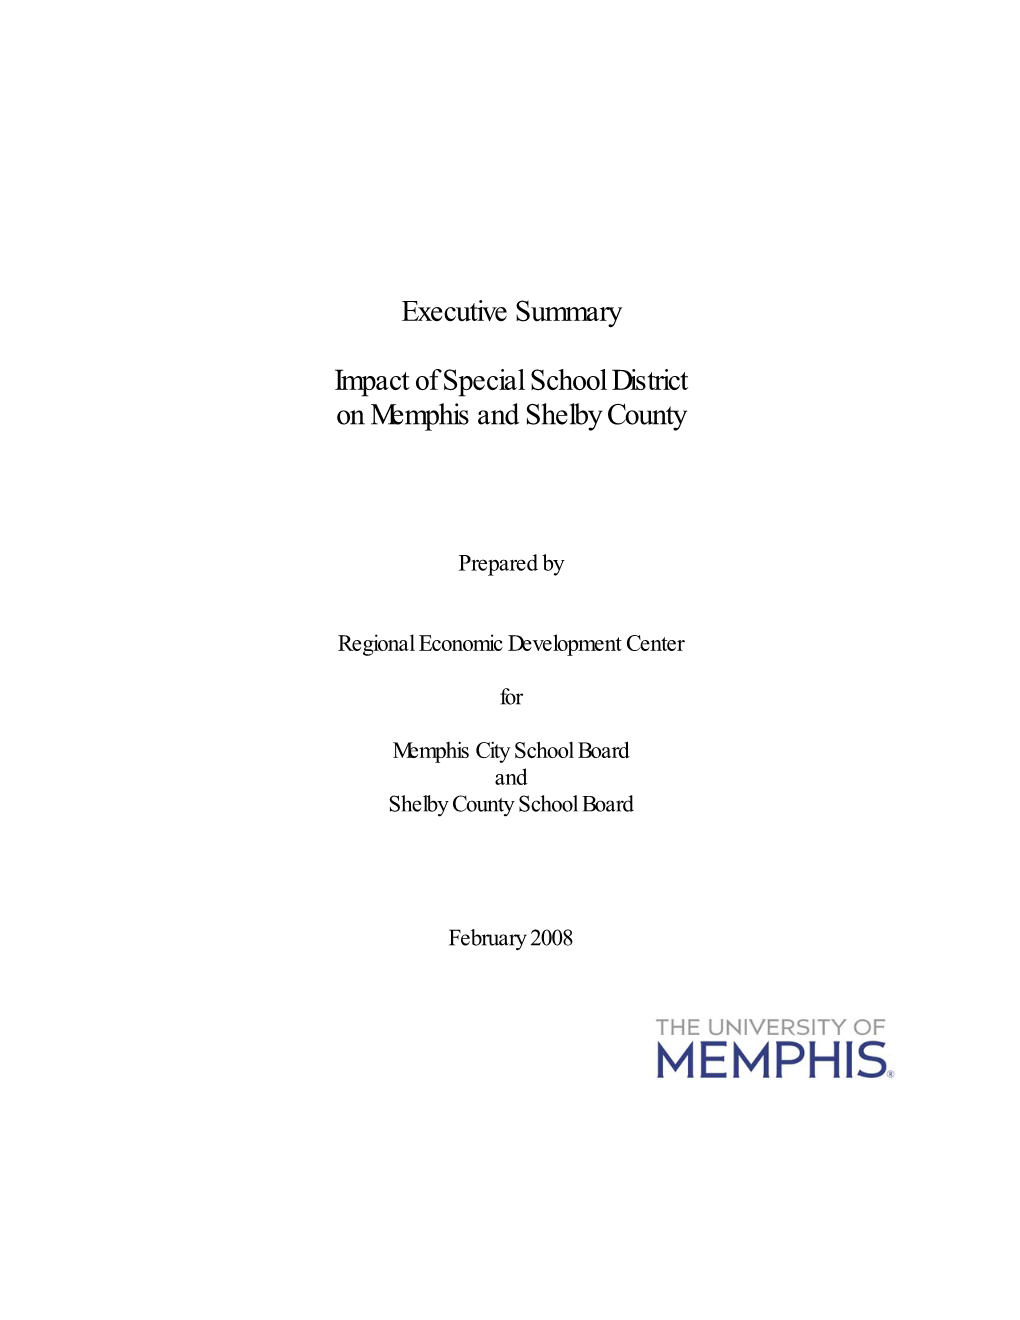 Special School District Executive Summary Draft for Discussion